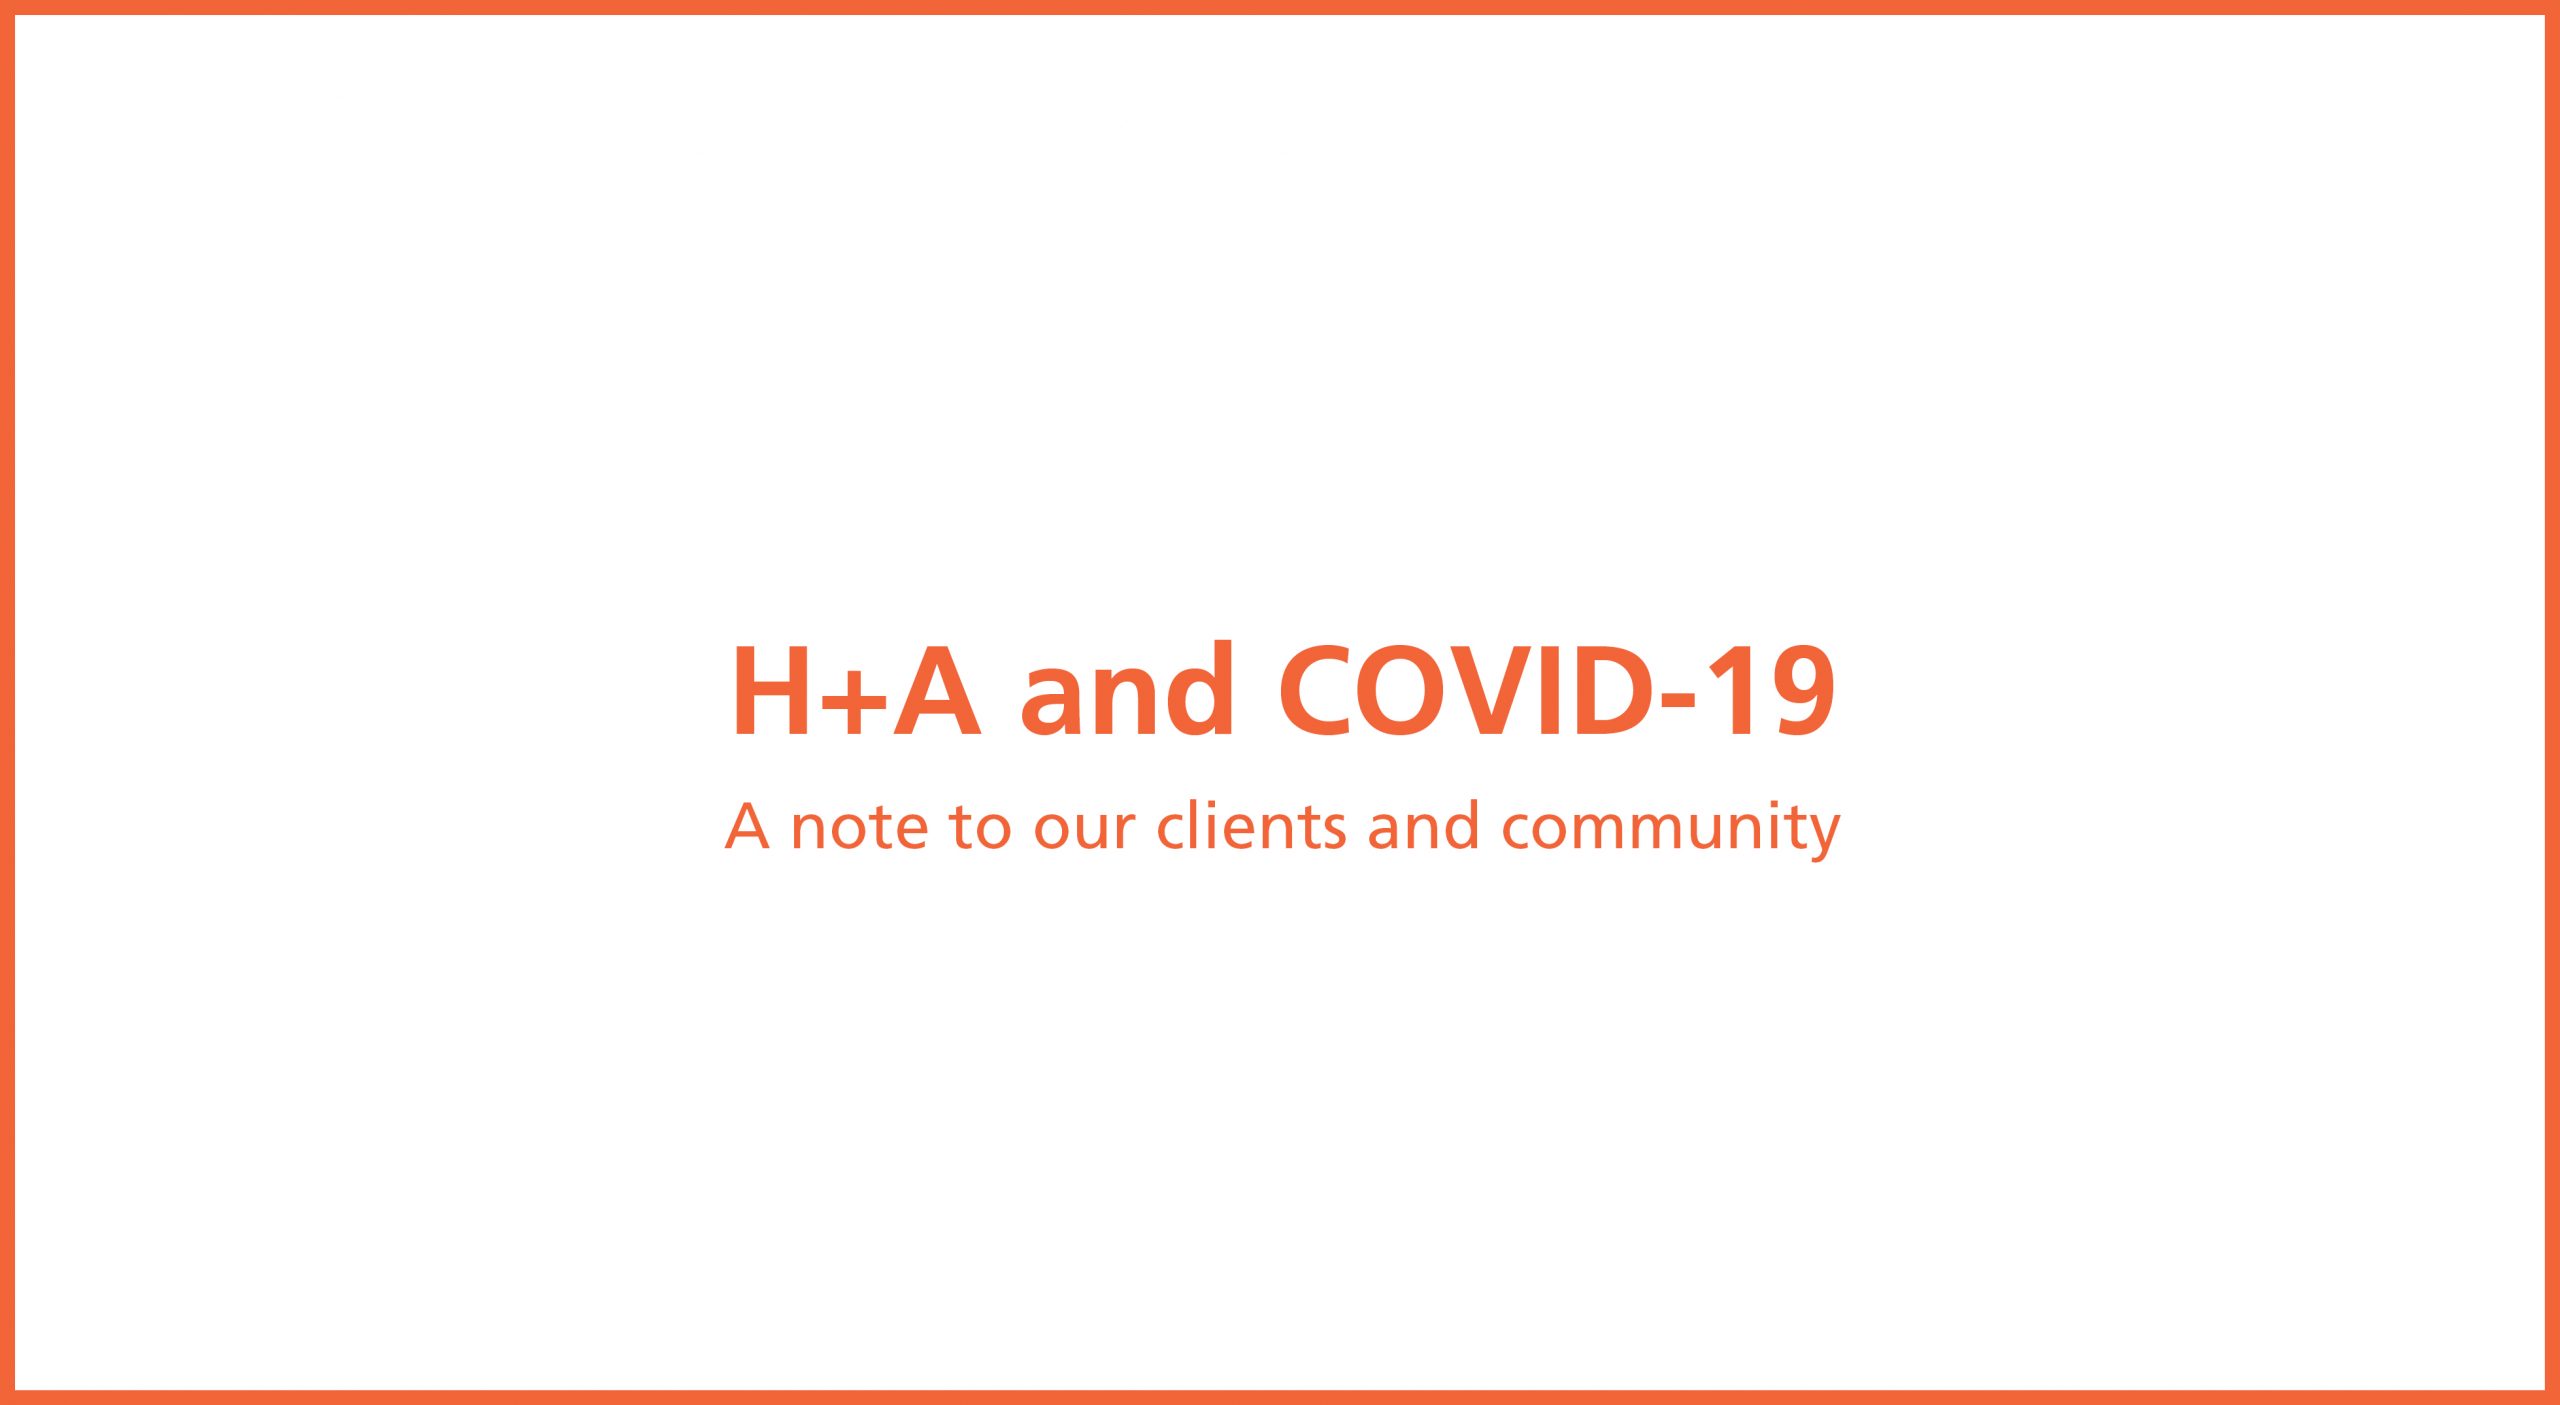 Hacin and COVID-19: A Note To Our Clients and Community